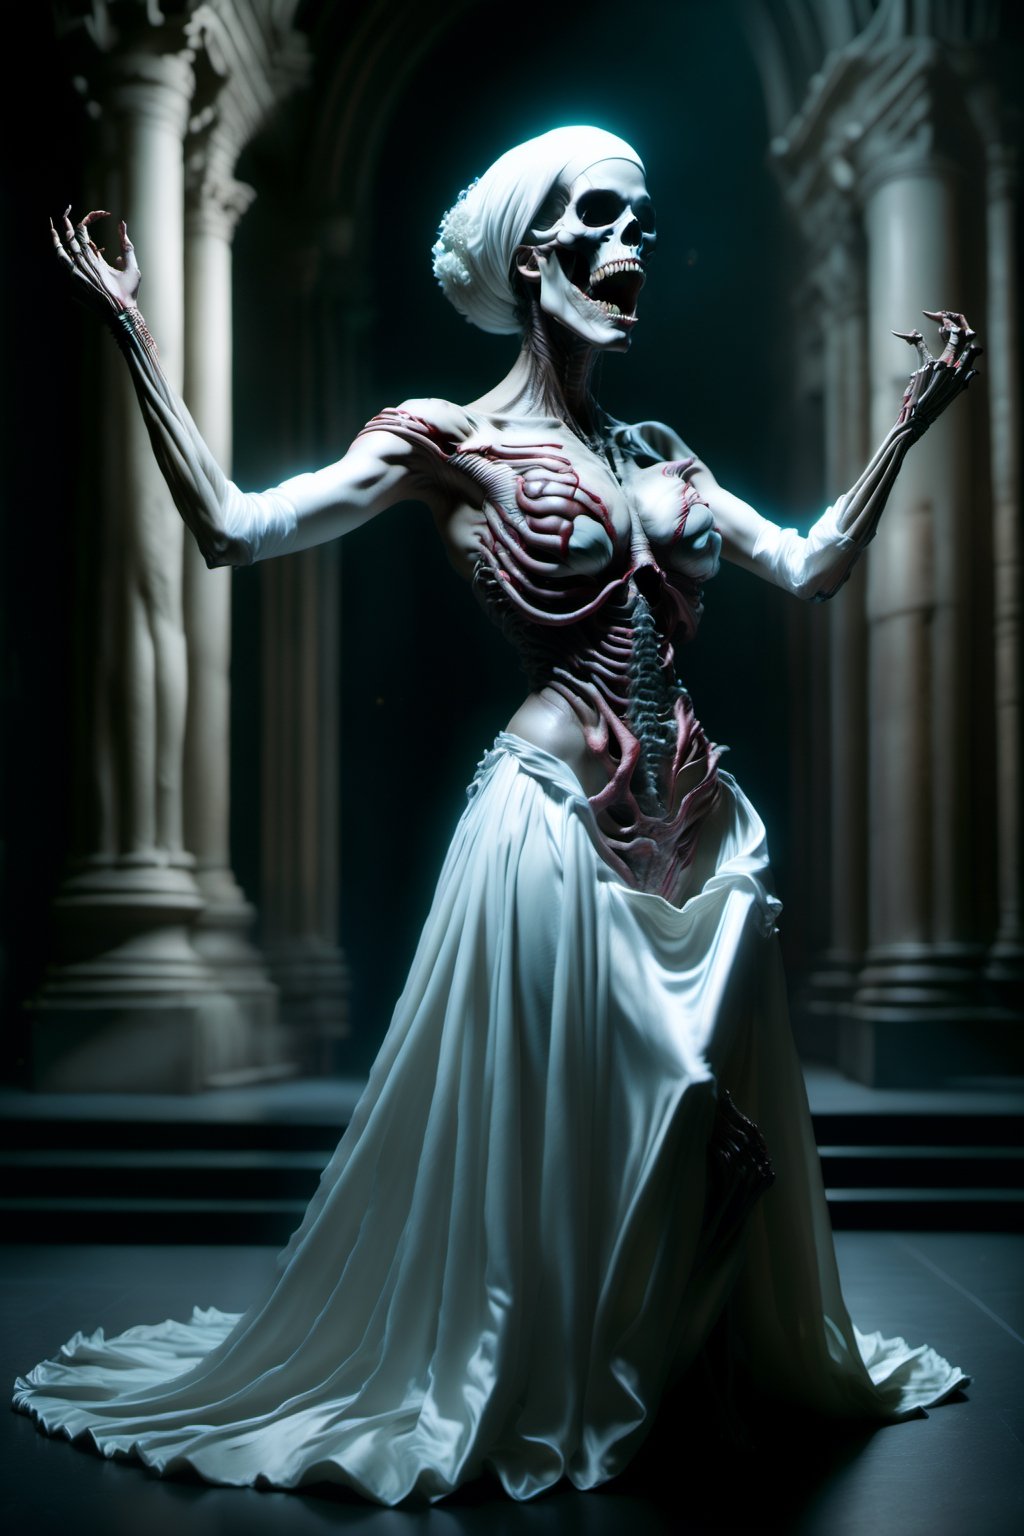 photorealistic Long exposure Shot, a female skeleton in white silk gown singing phanton of opera, in dramatic pose, looking up to the spot light, camera on left side, dramatic lighting. Extremely Realistic,photorealistic